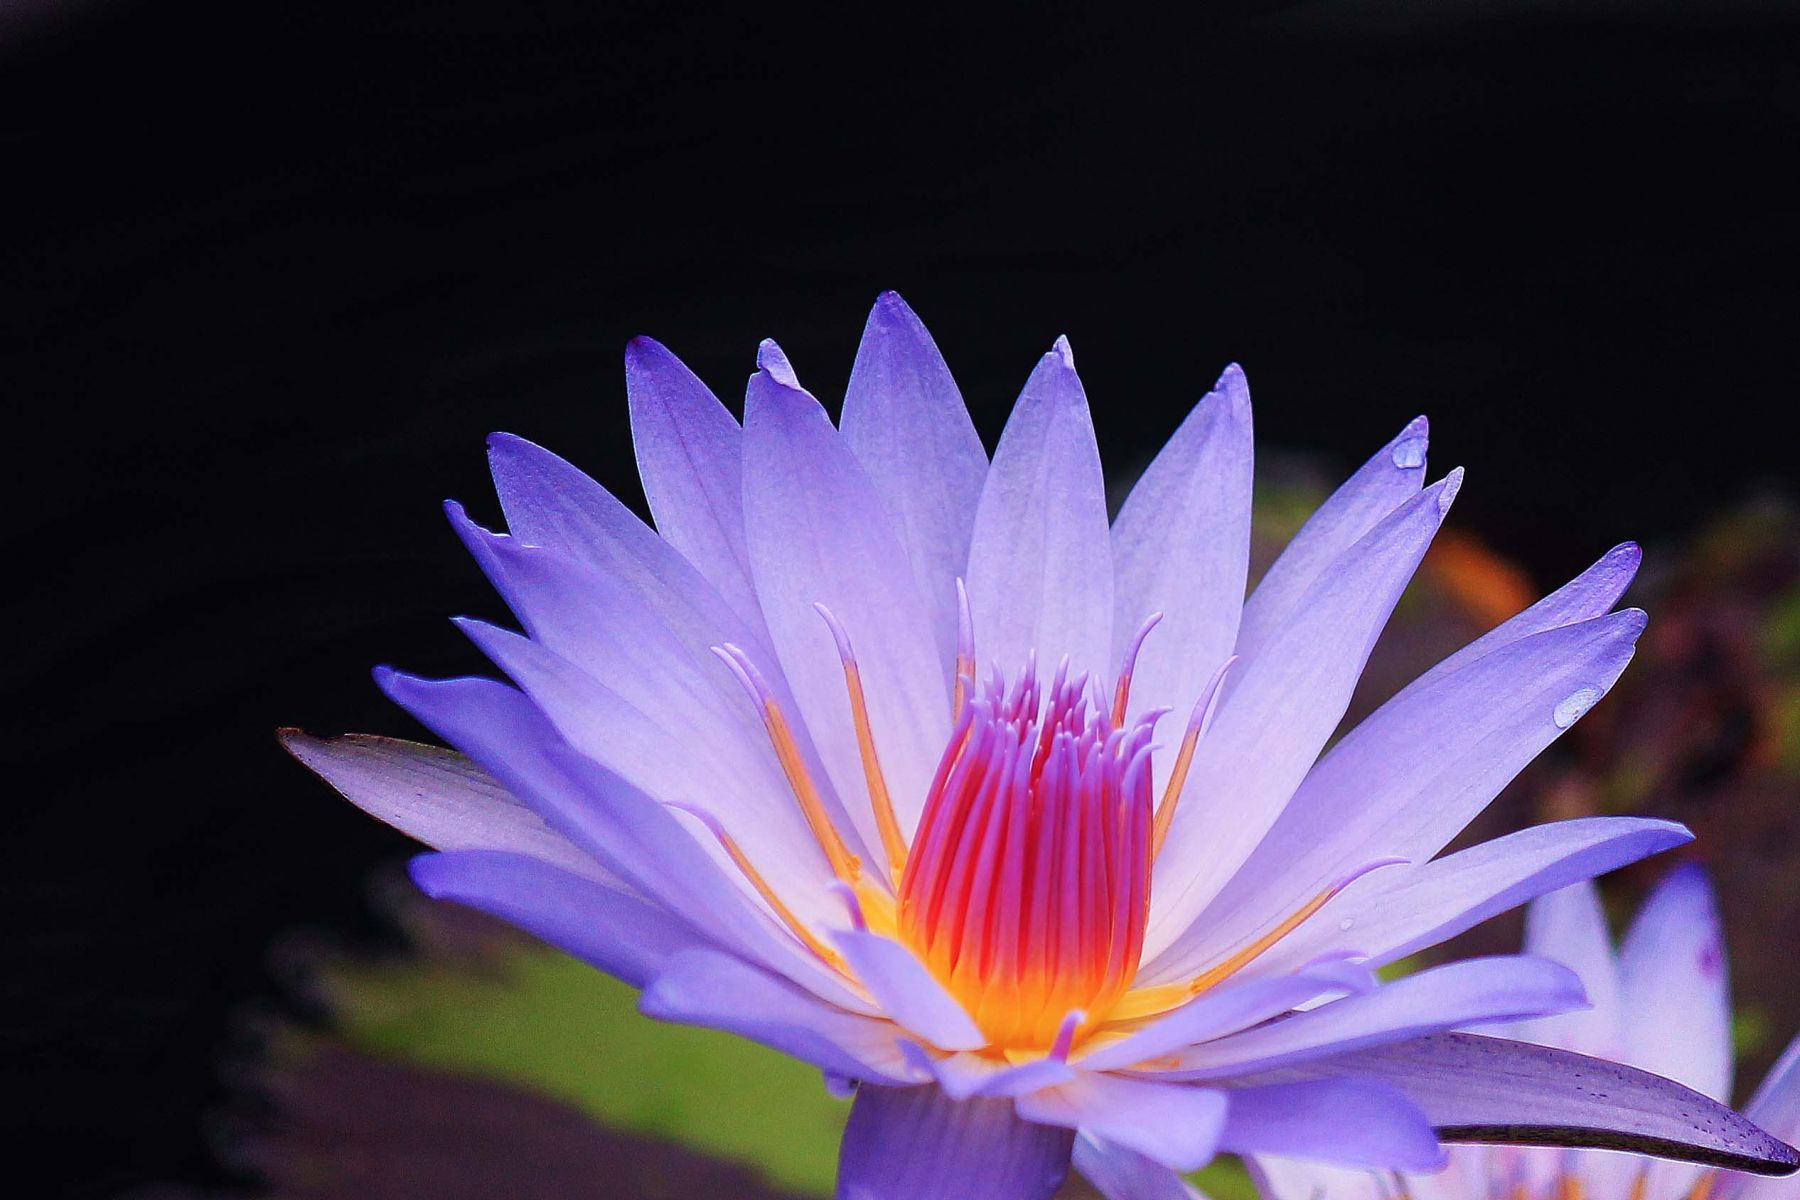 Purple Water Lily. HD Flowers Wallpaper for Mobile and Desktop